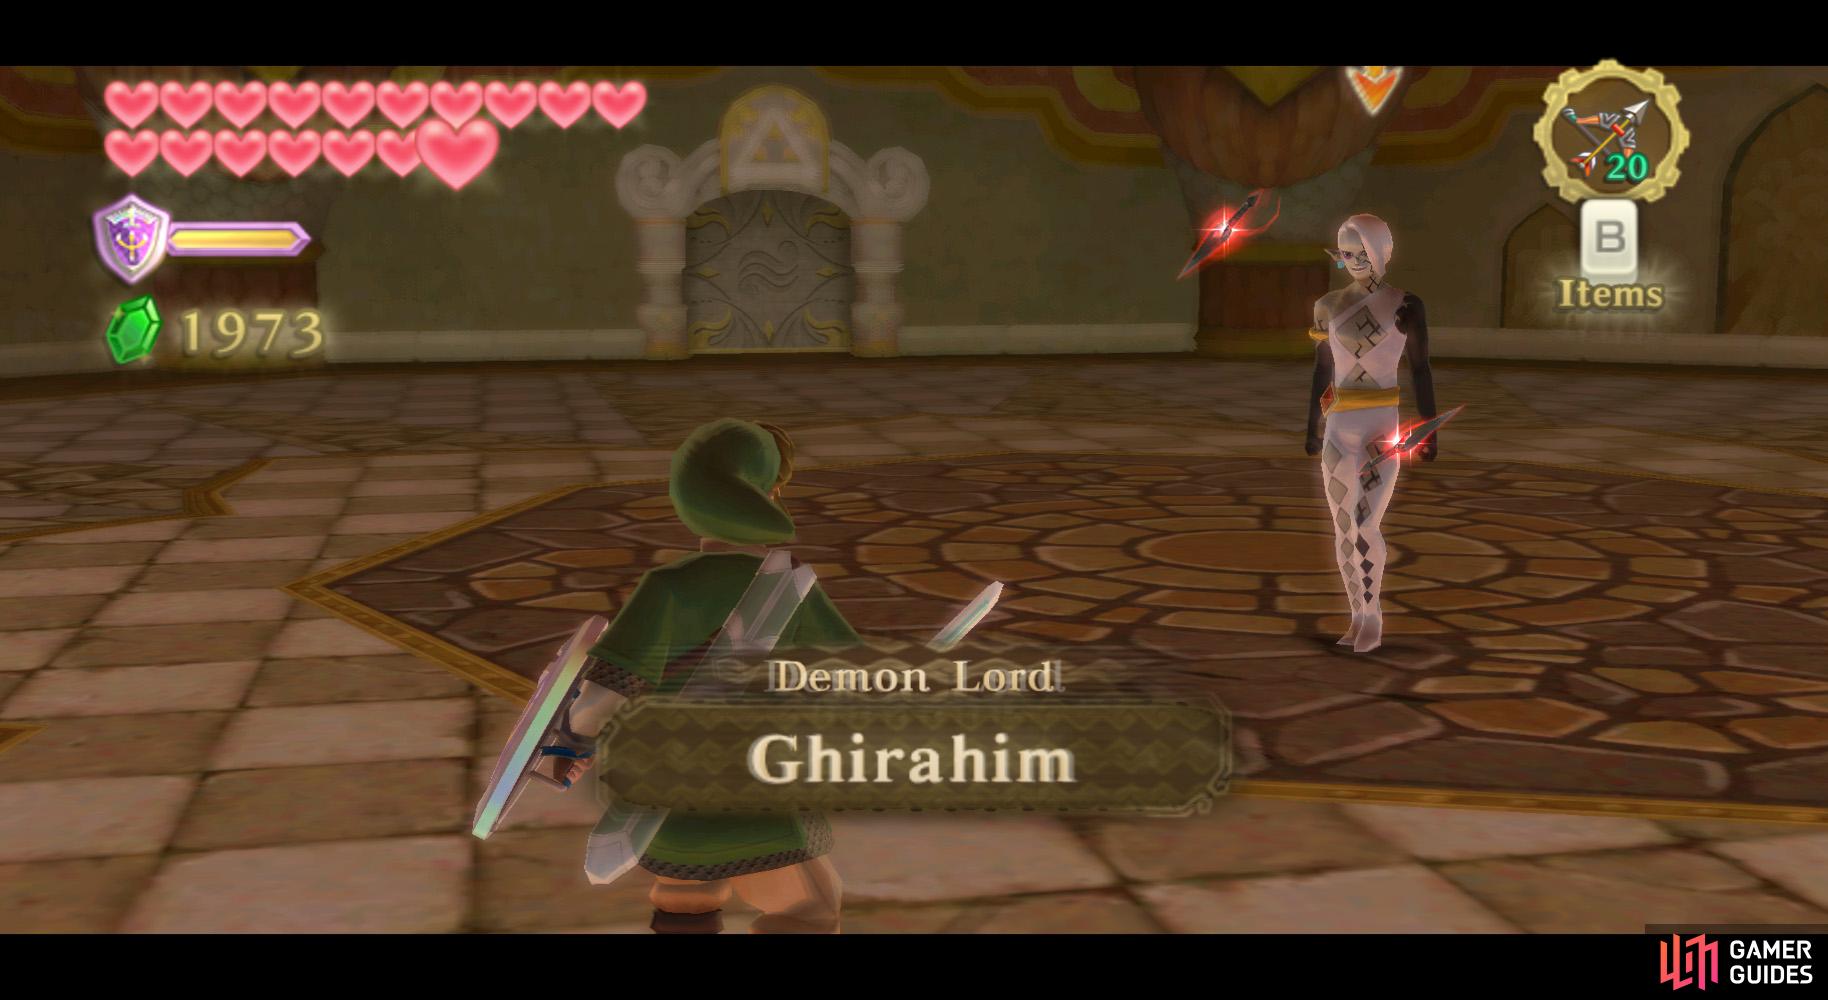 Besides the extra projectiles, you can deal with Ghirahim in the same manner as before.